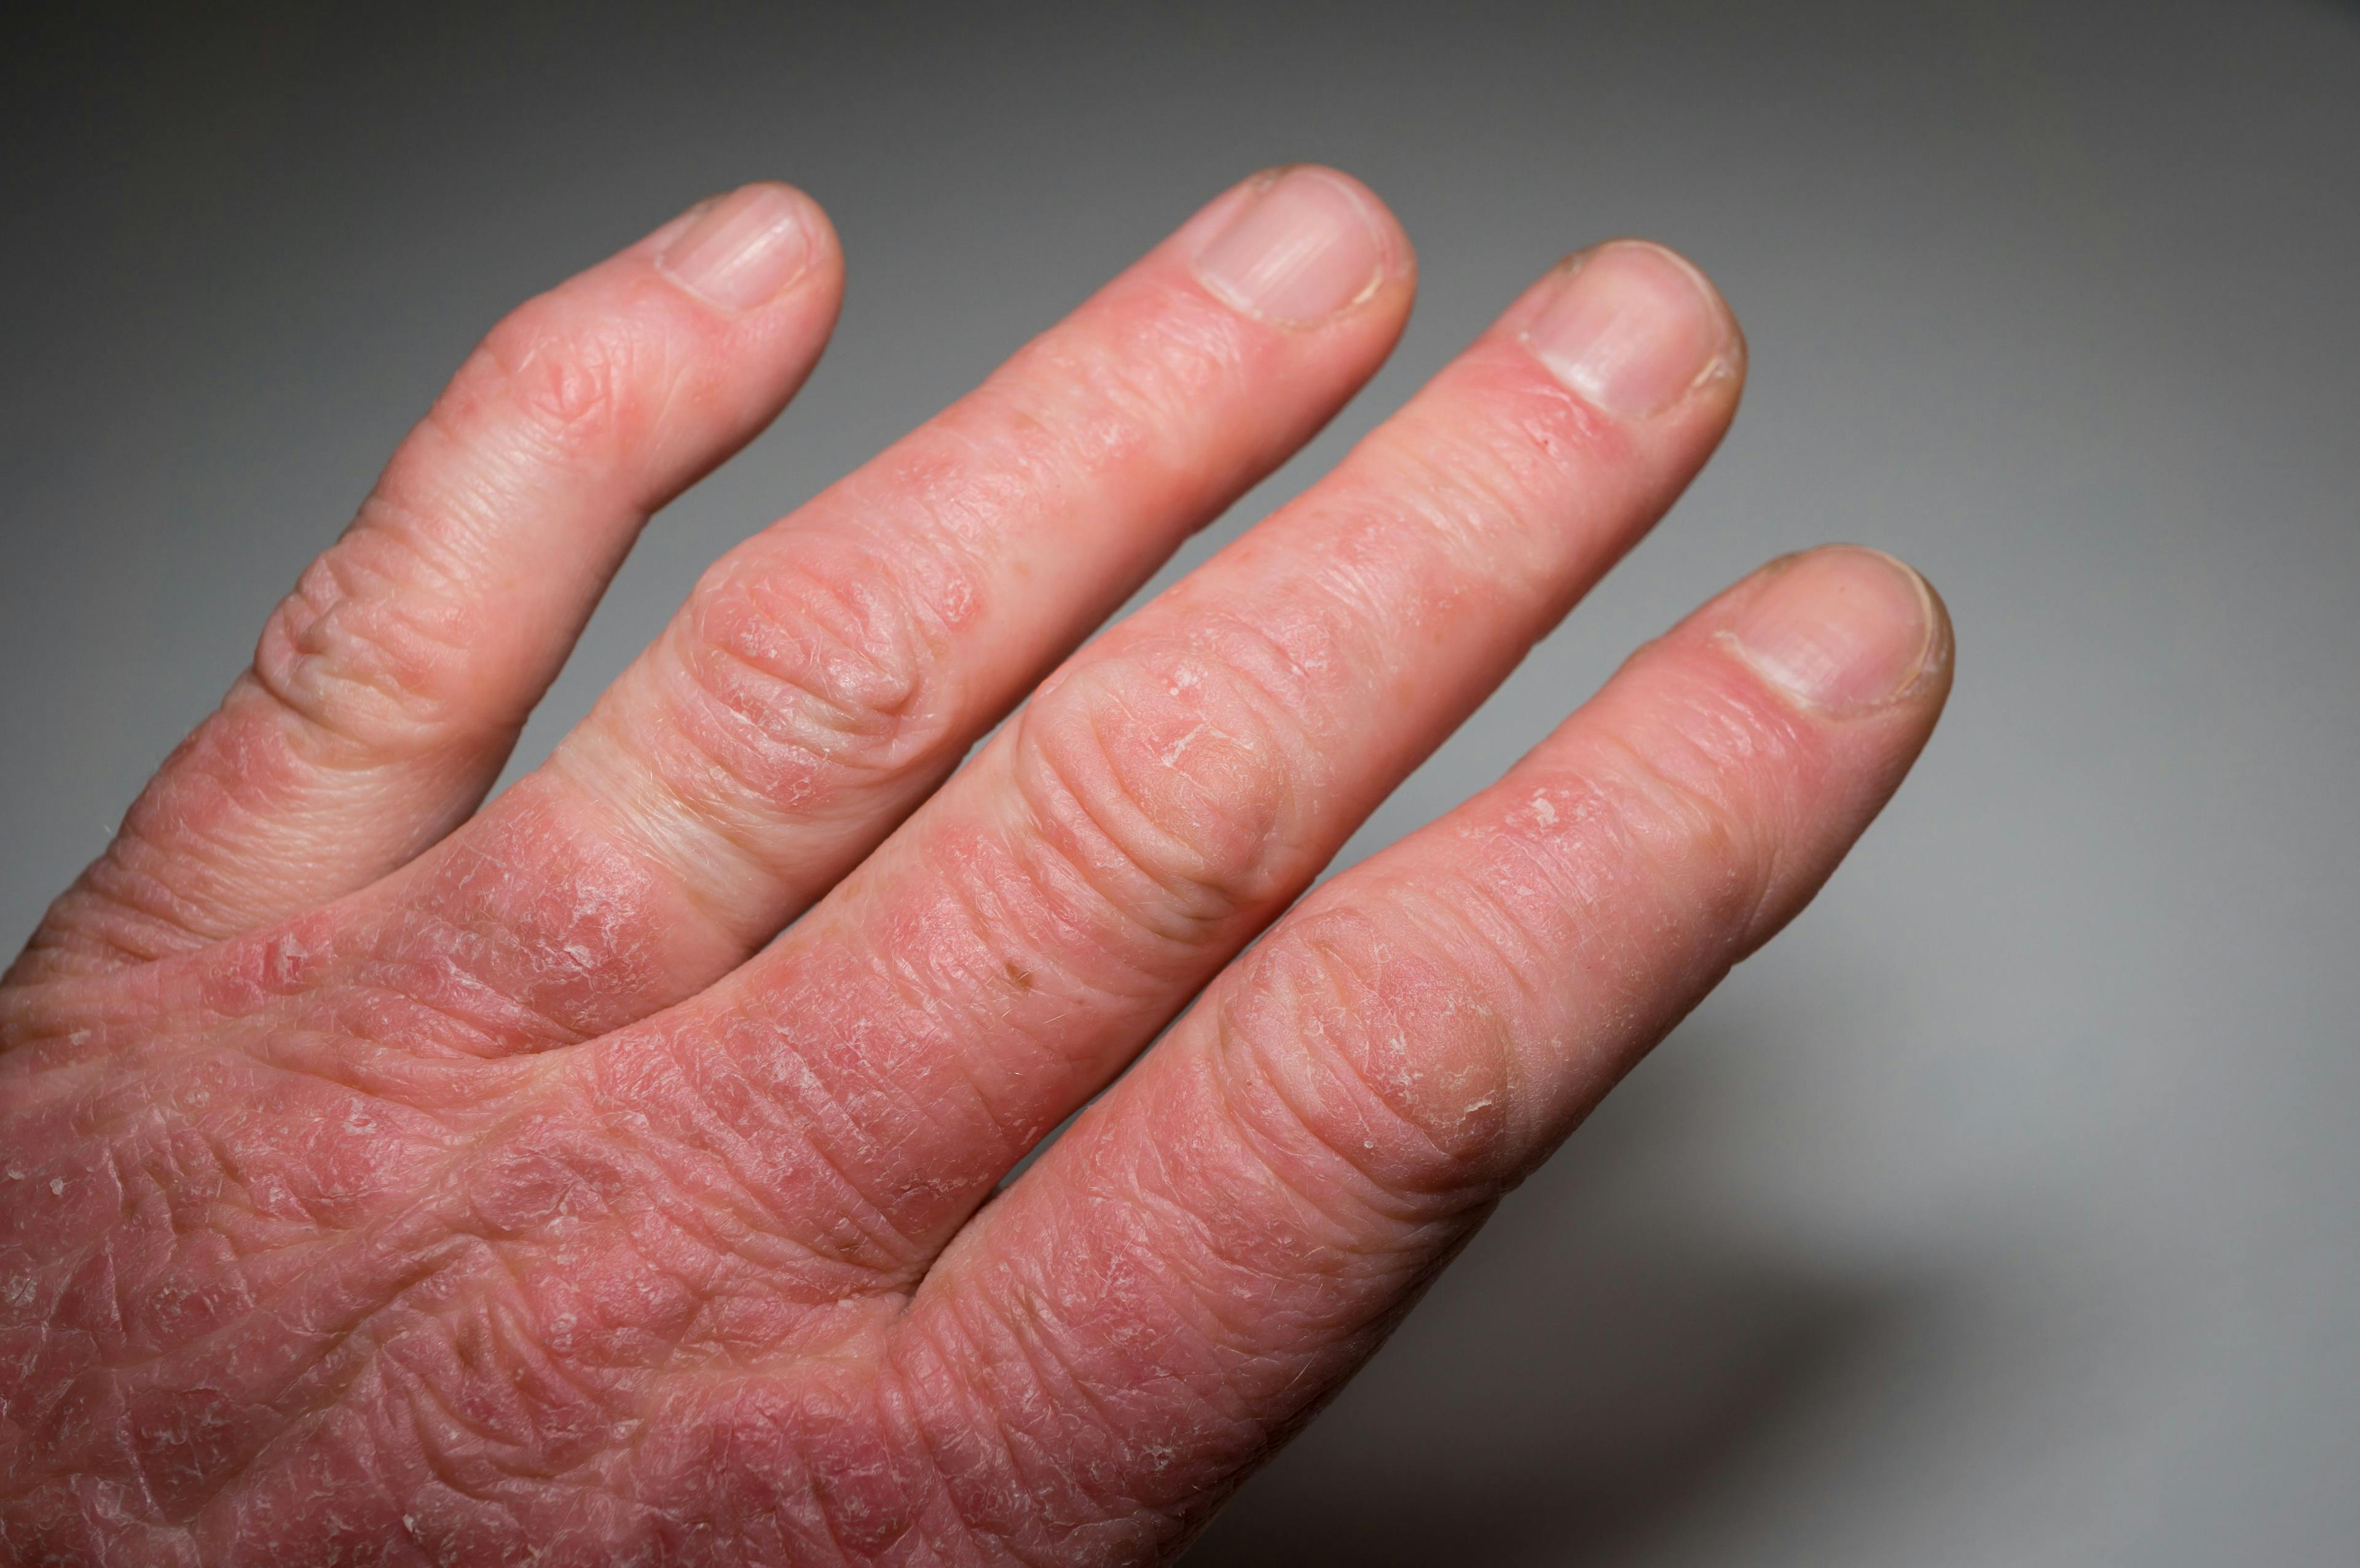 Hand with psoriasis